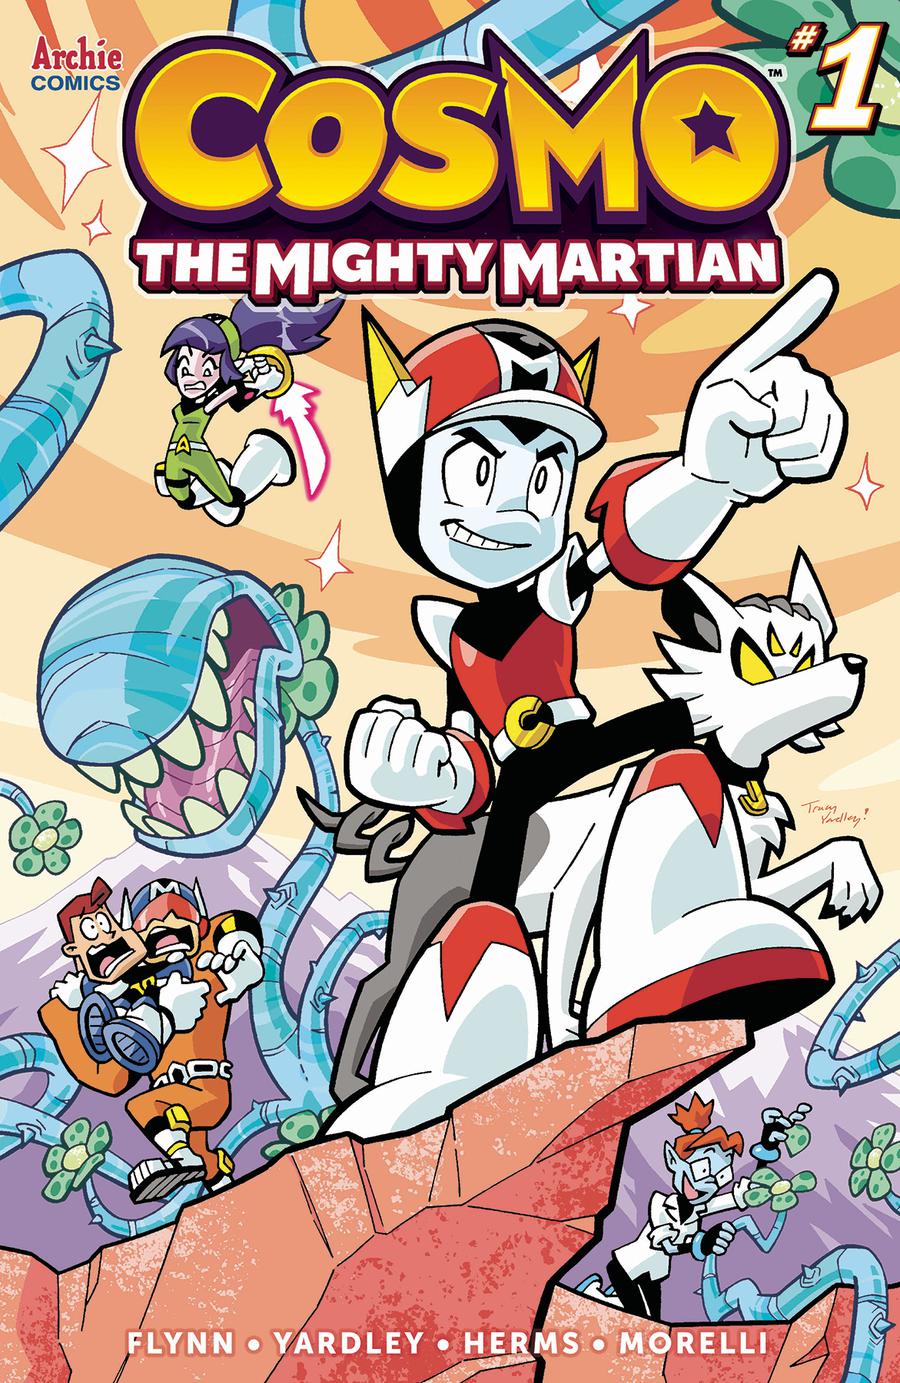 Cosmo The Mighty Martian #1 Cover A Regular Tracy Yardley Cover